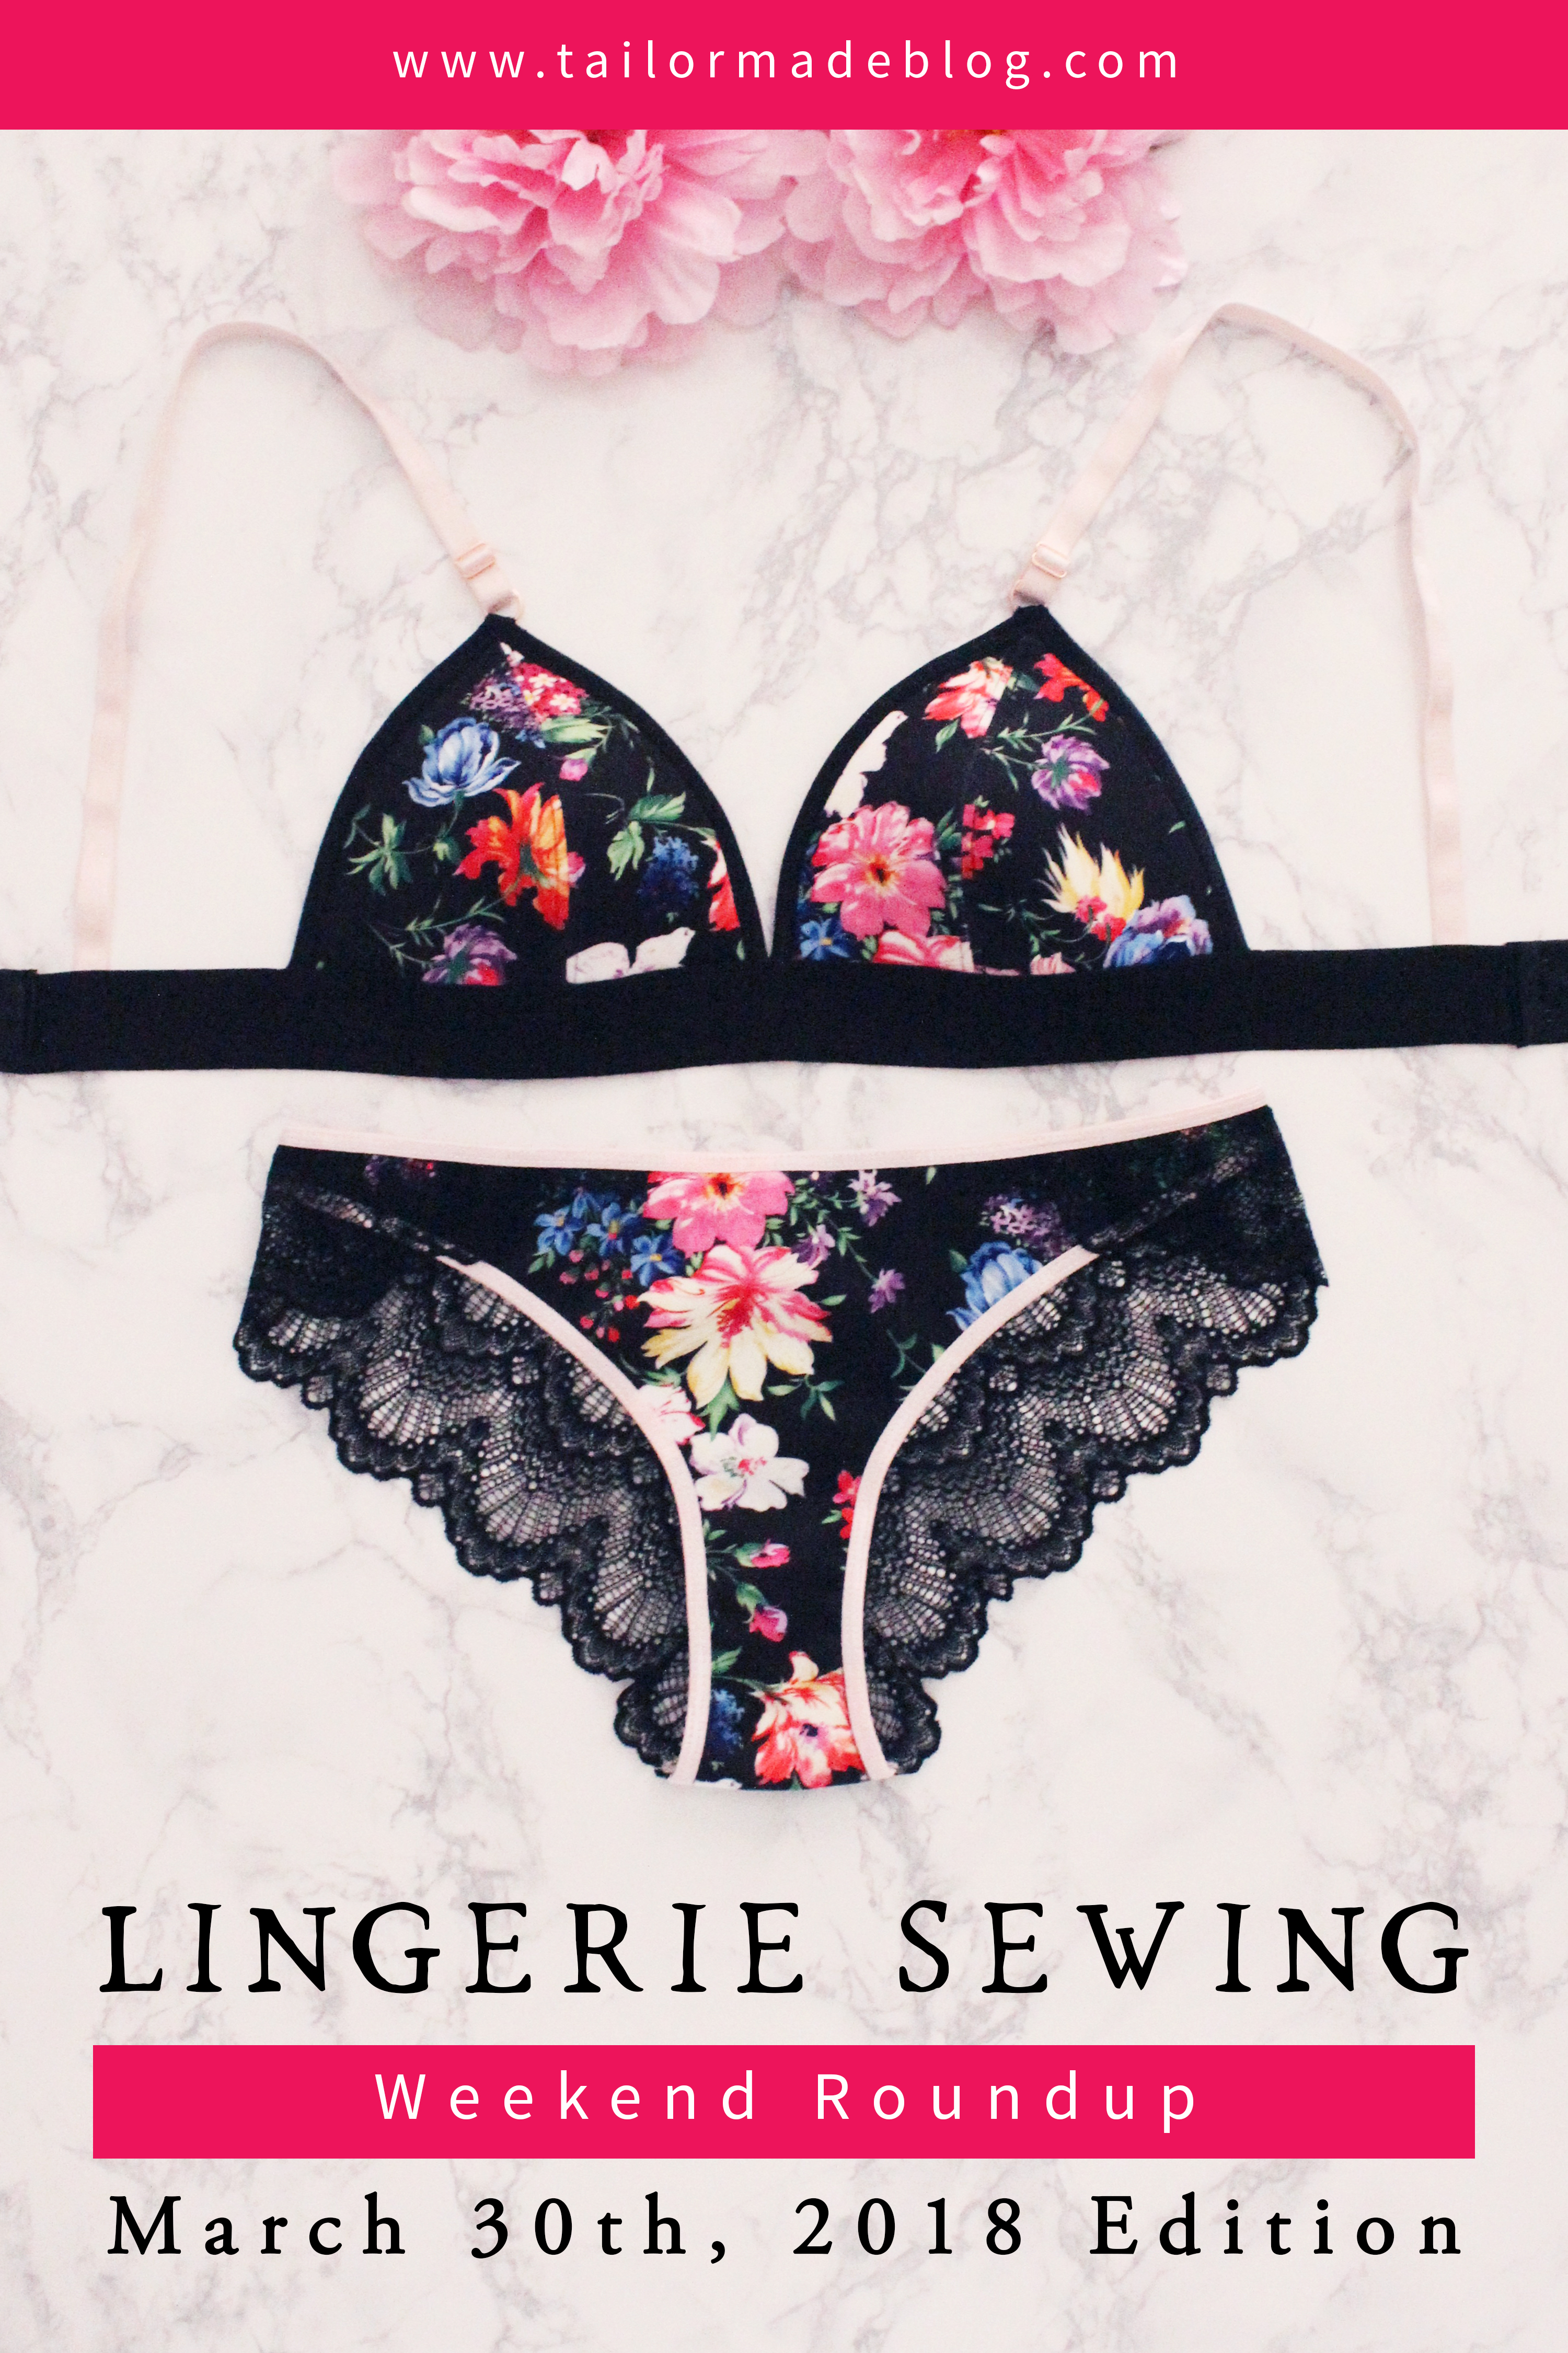 March 30th, 2018 Lingerie Sewing Weekend Round Up Latest news and makes and sewing projects from the lingerie sewing bra making community